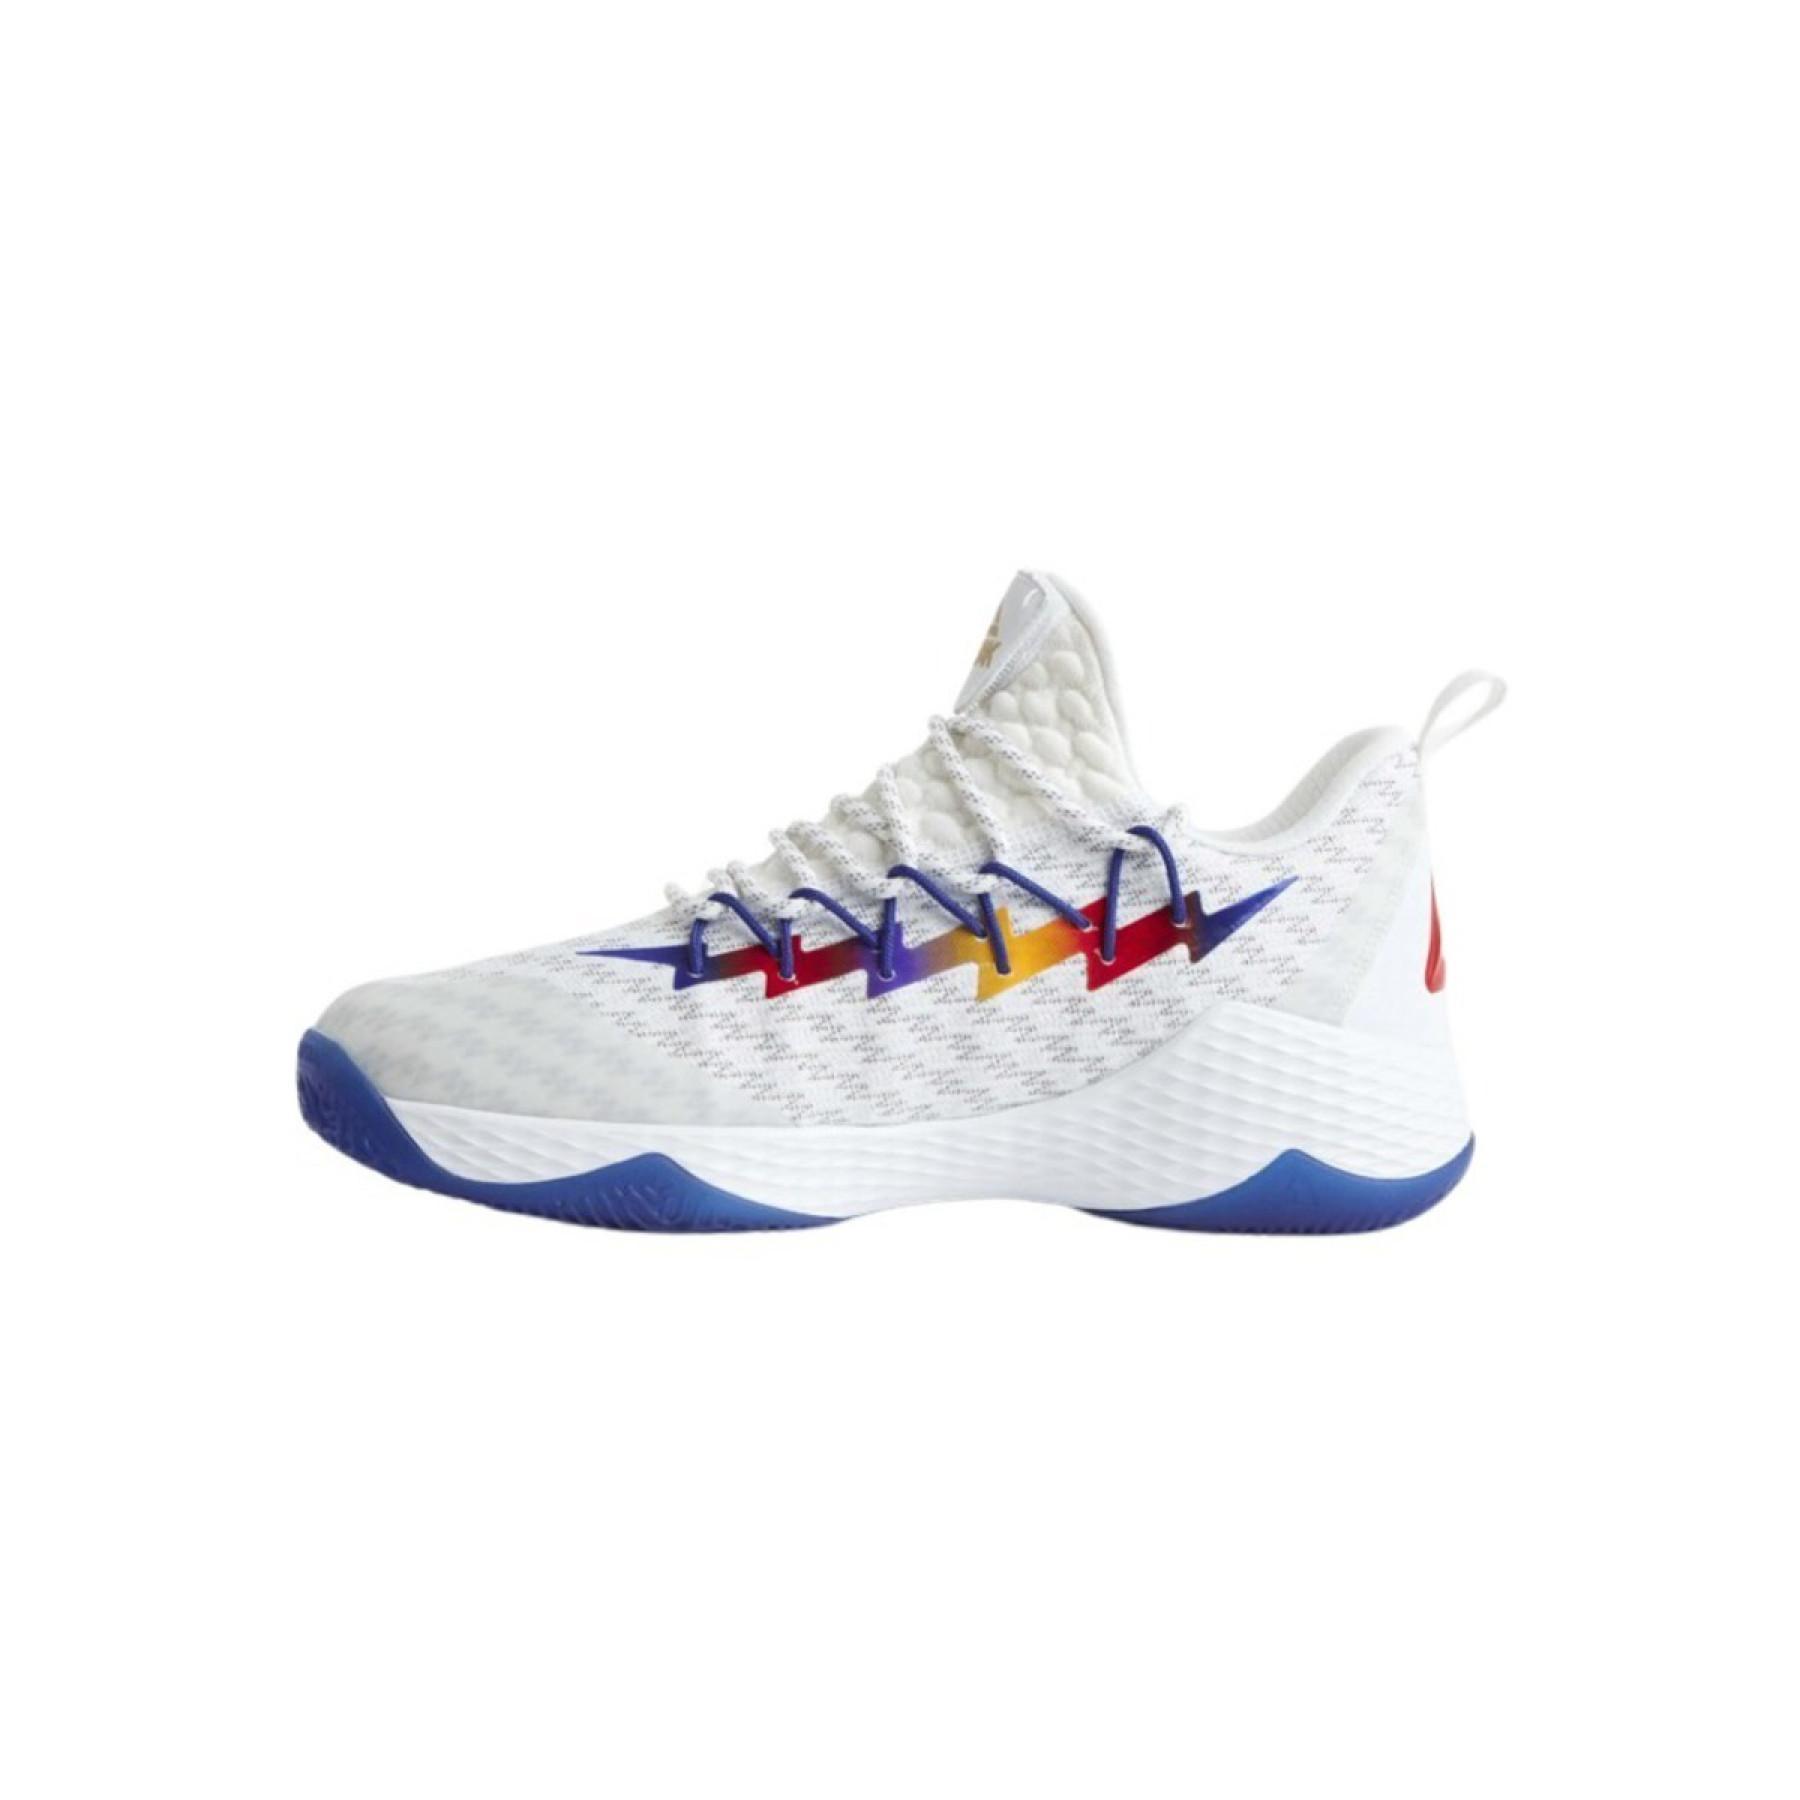 Chaussures indoor Peak Lou Williams 2 édition 6th man